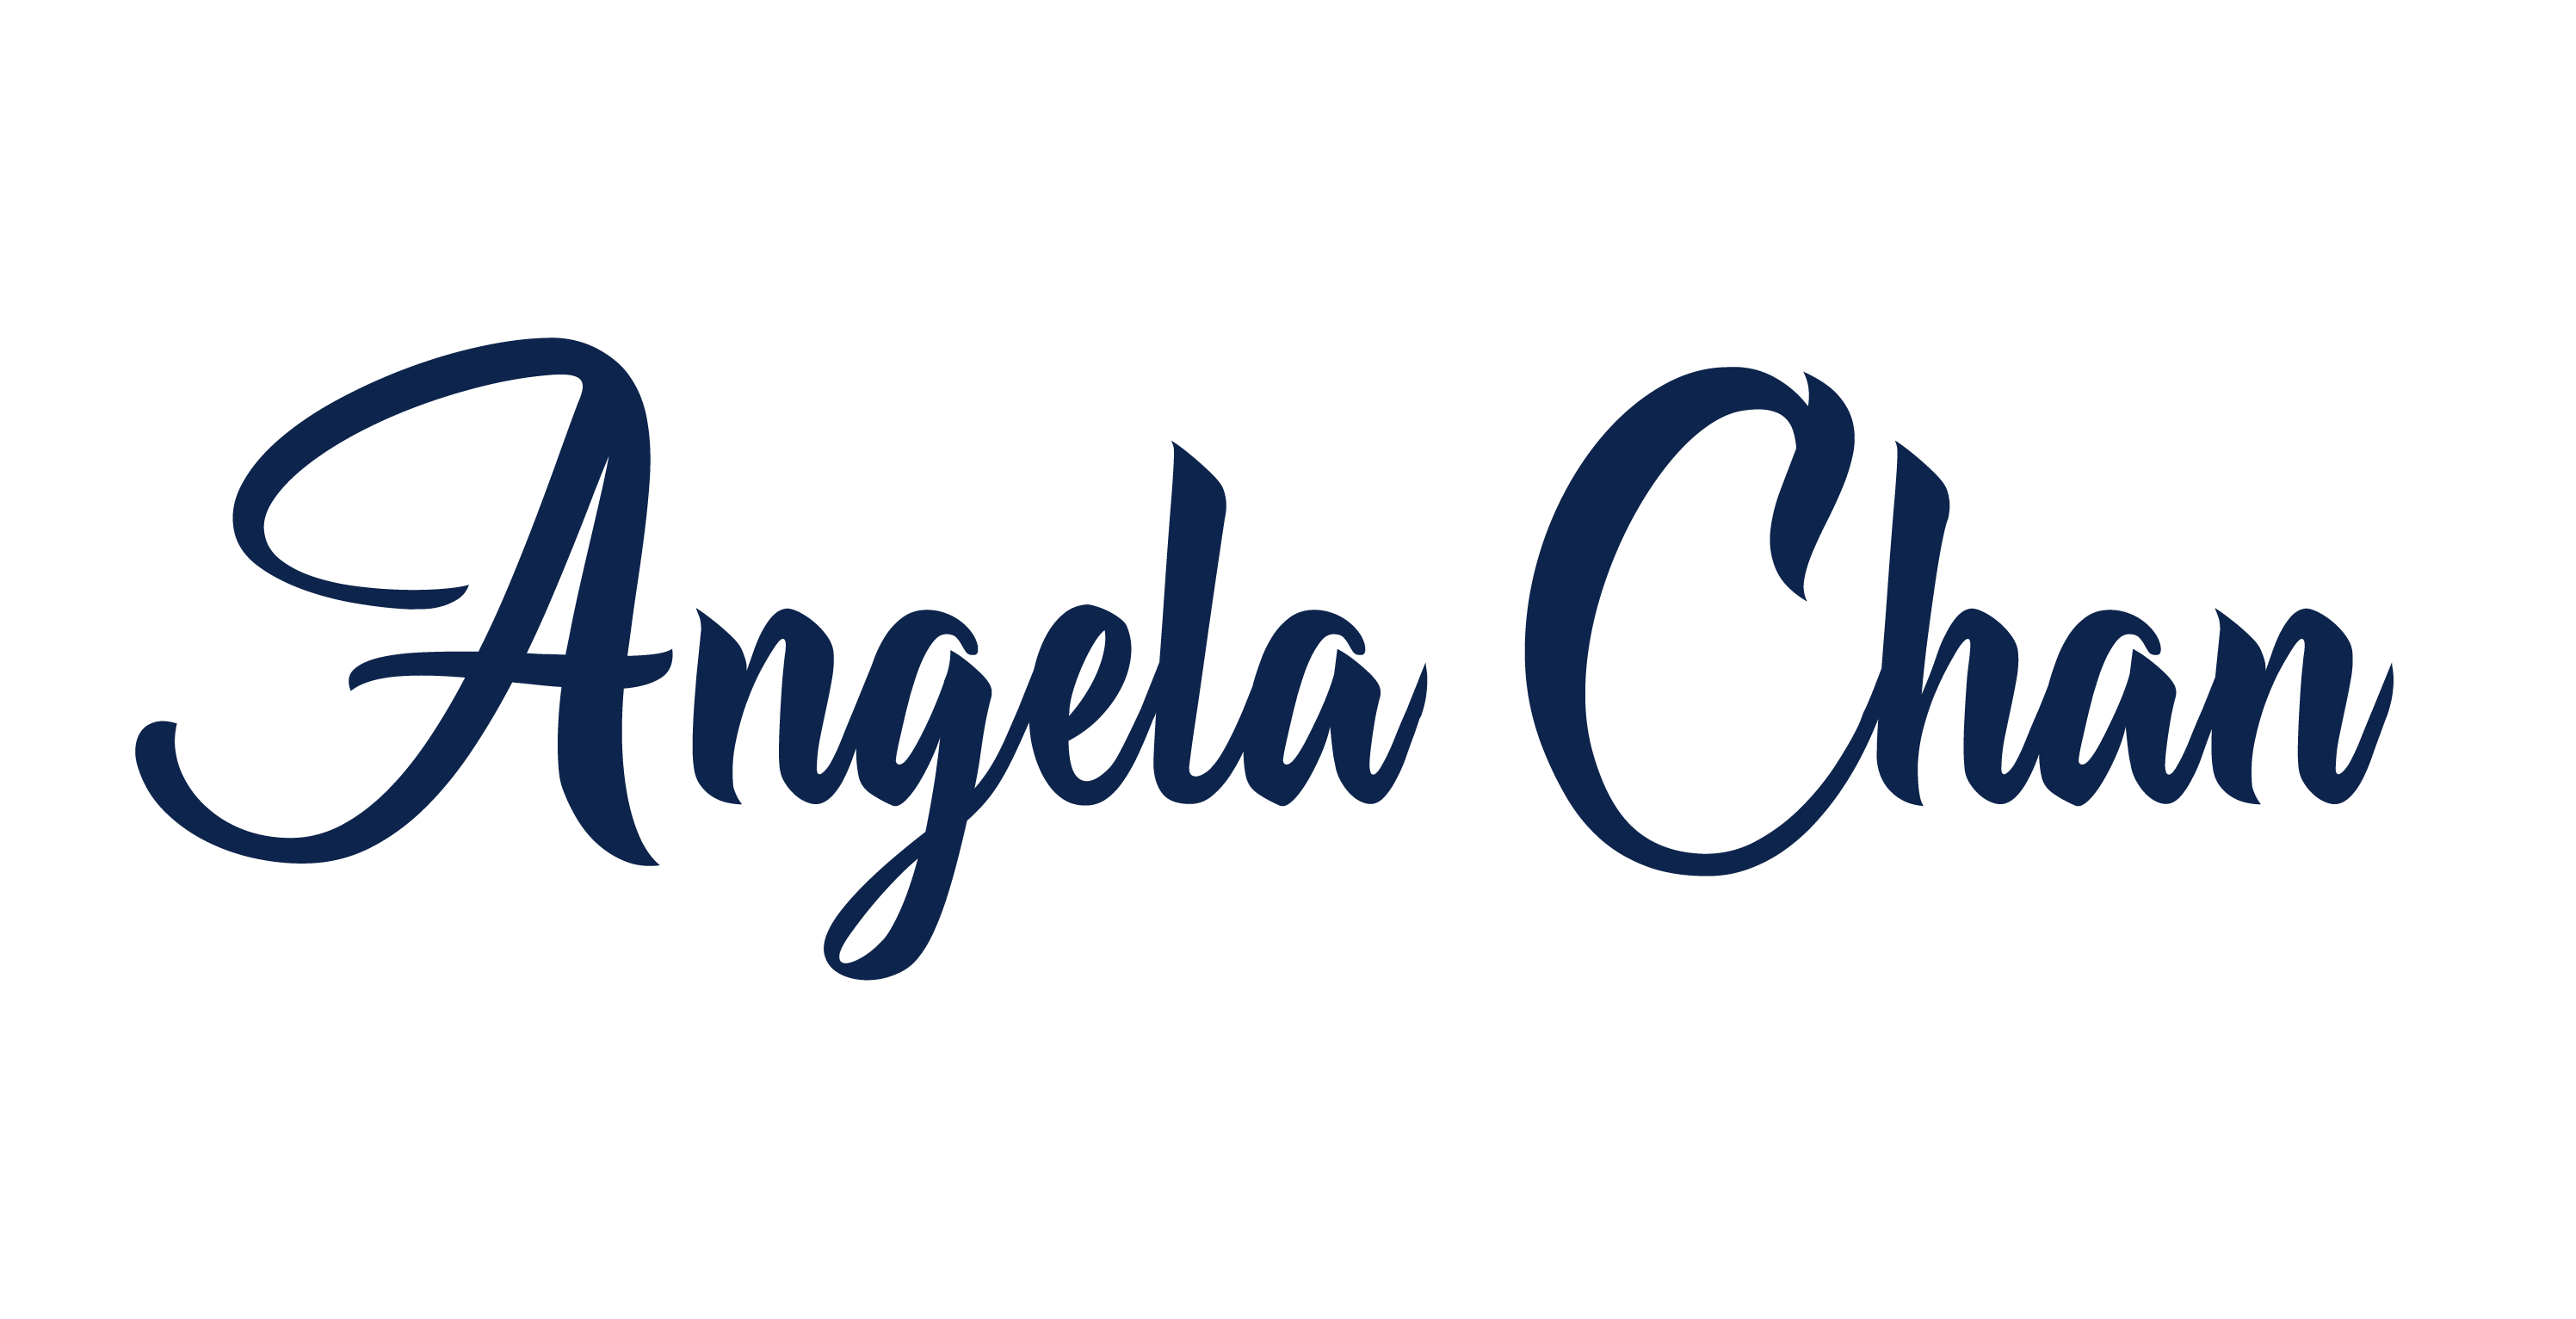 Angela Chan – Author, Photographer, Collectibles and Auction Consultant